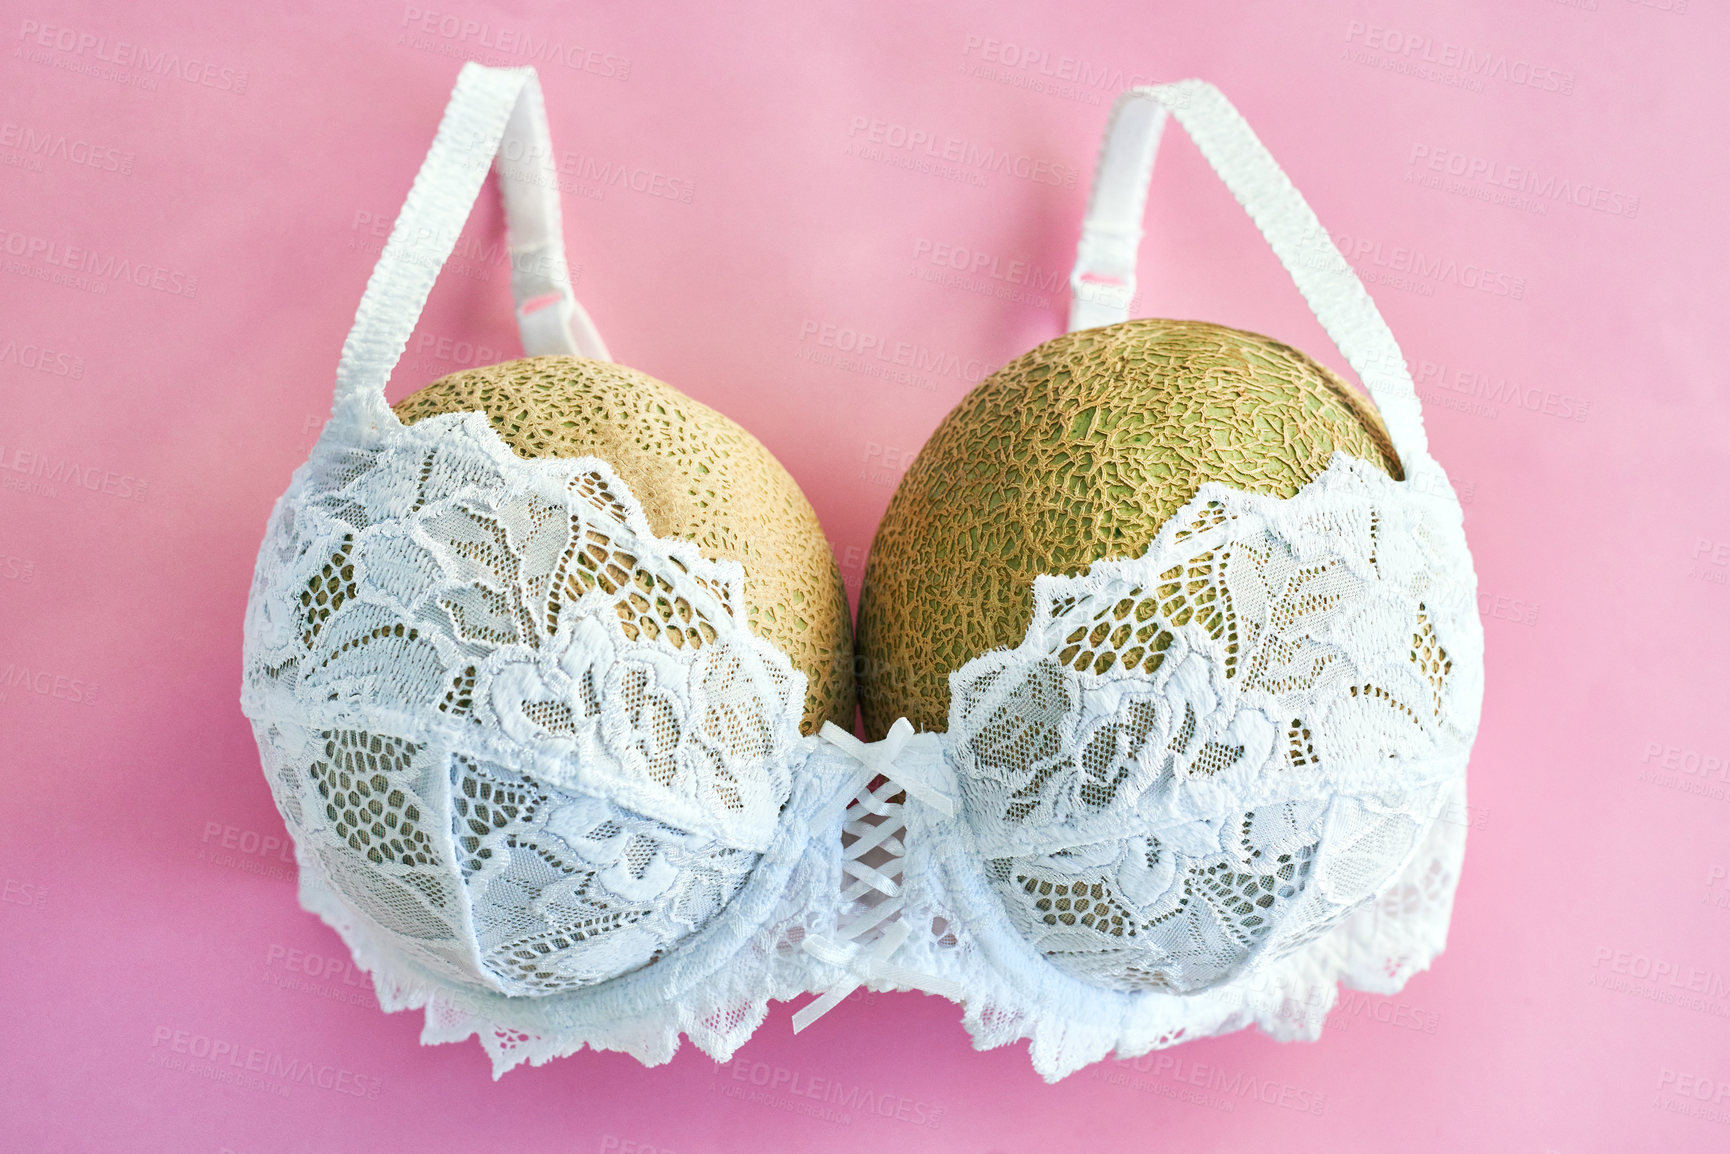 Buy stock photo Studio shot of melons in a bra against a pink background